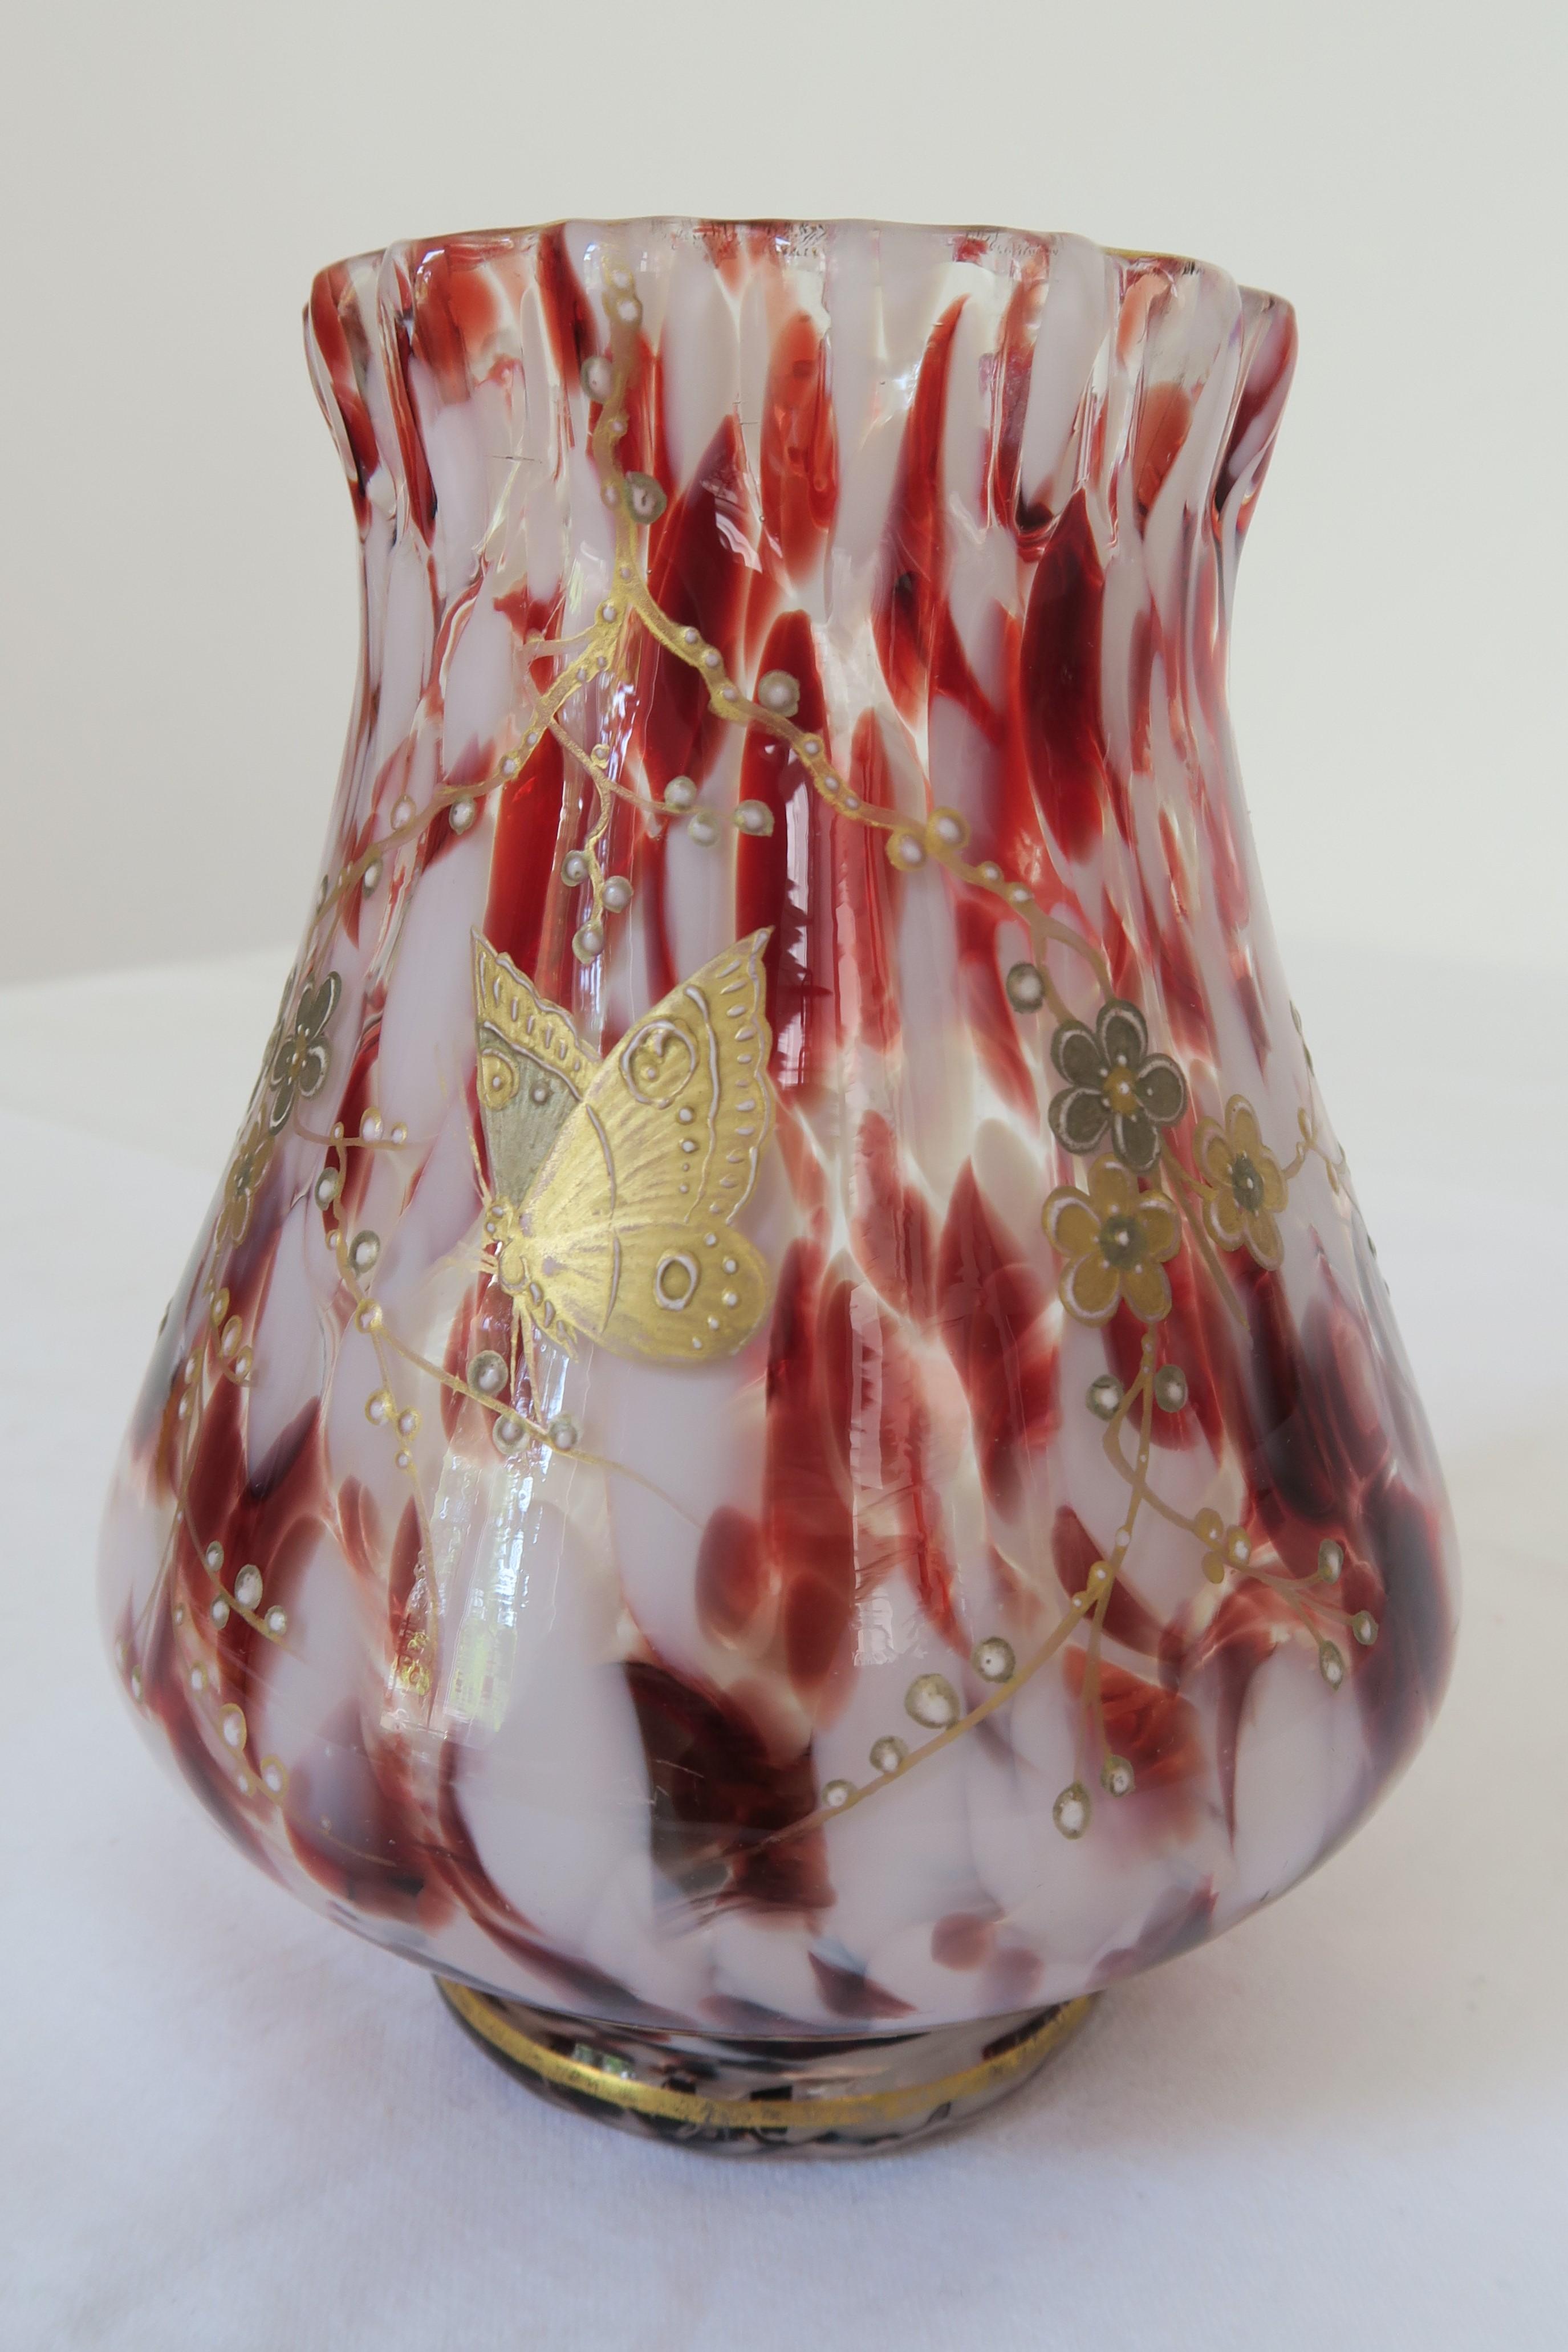 For sale is a pretty little glass vase with red and white specks and gold- and silver colour applications. The design can be attributed to French glass and ceramic Artisan Émile Gallé. The vase is decorated with endearing mutterfly and cherry